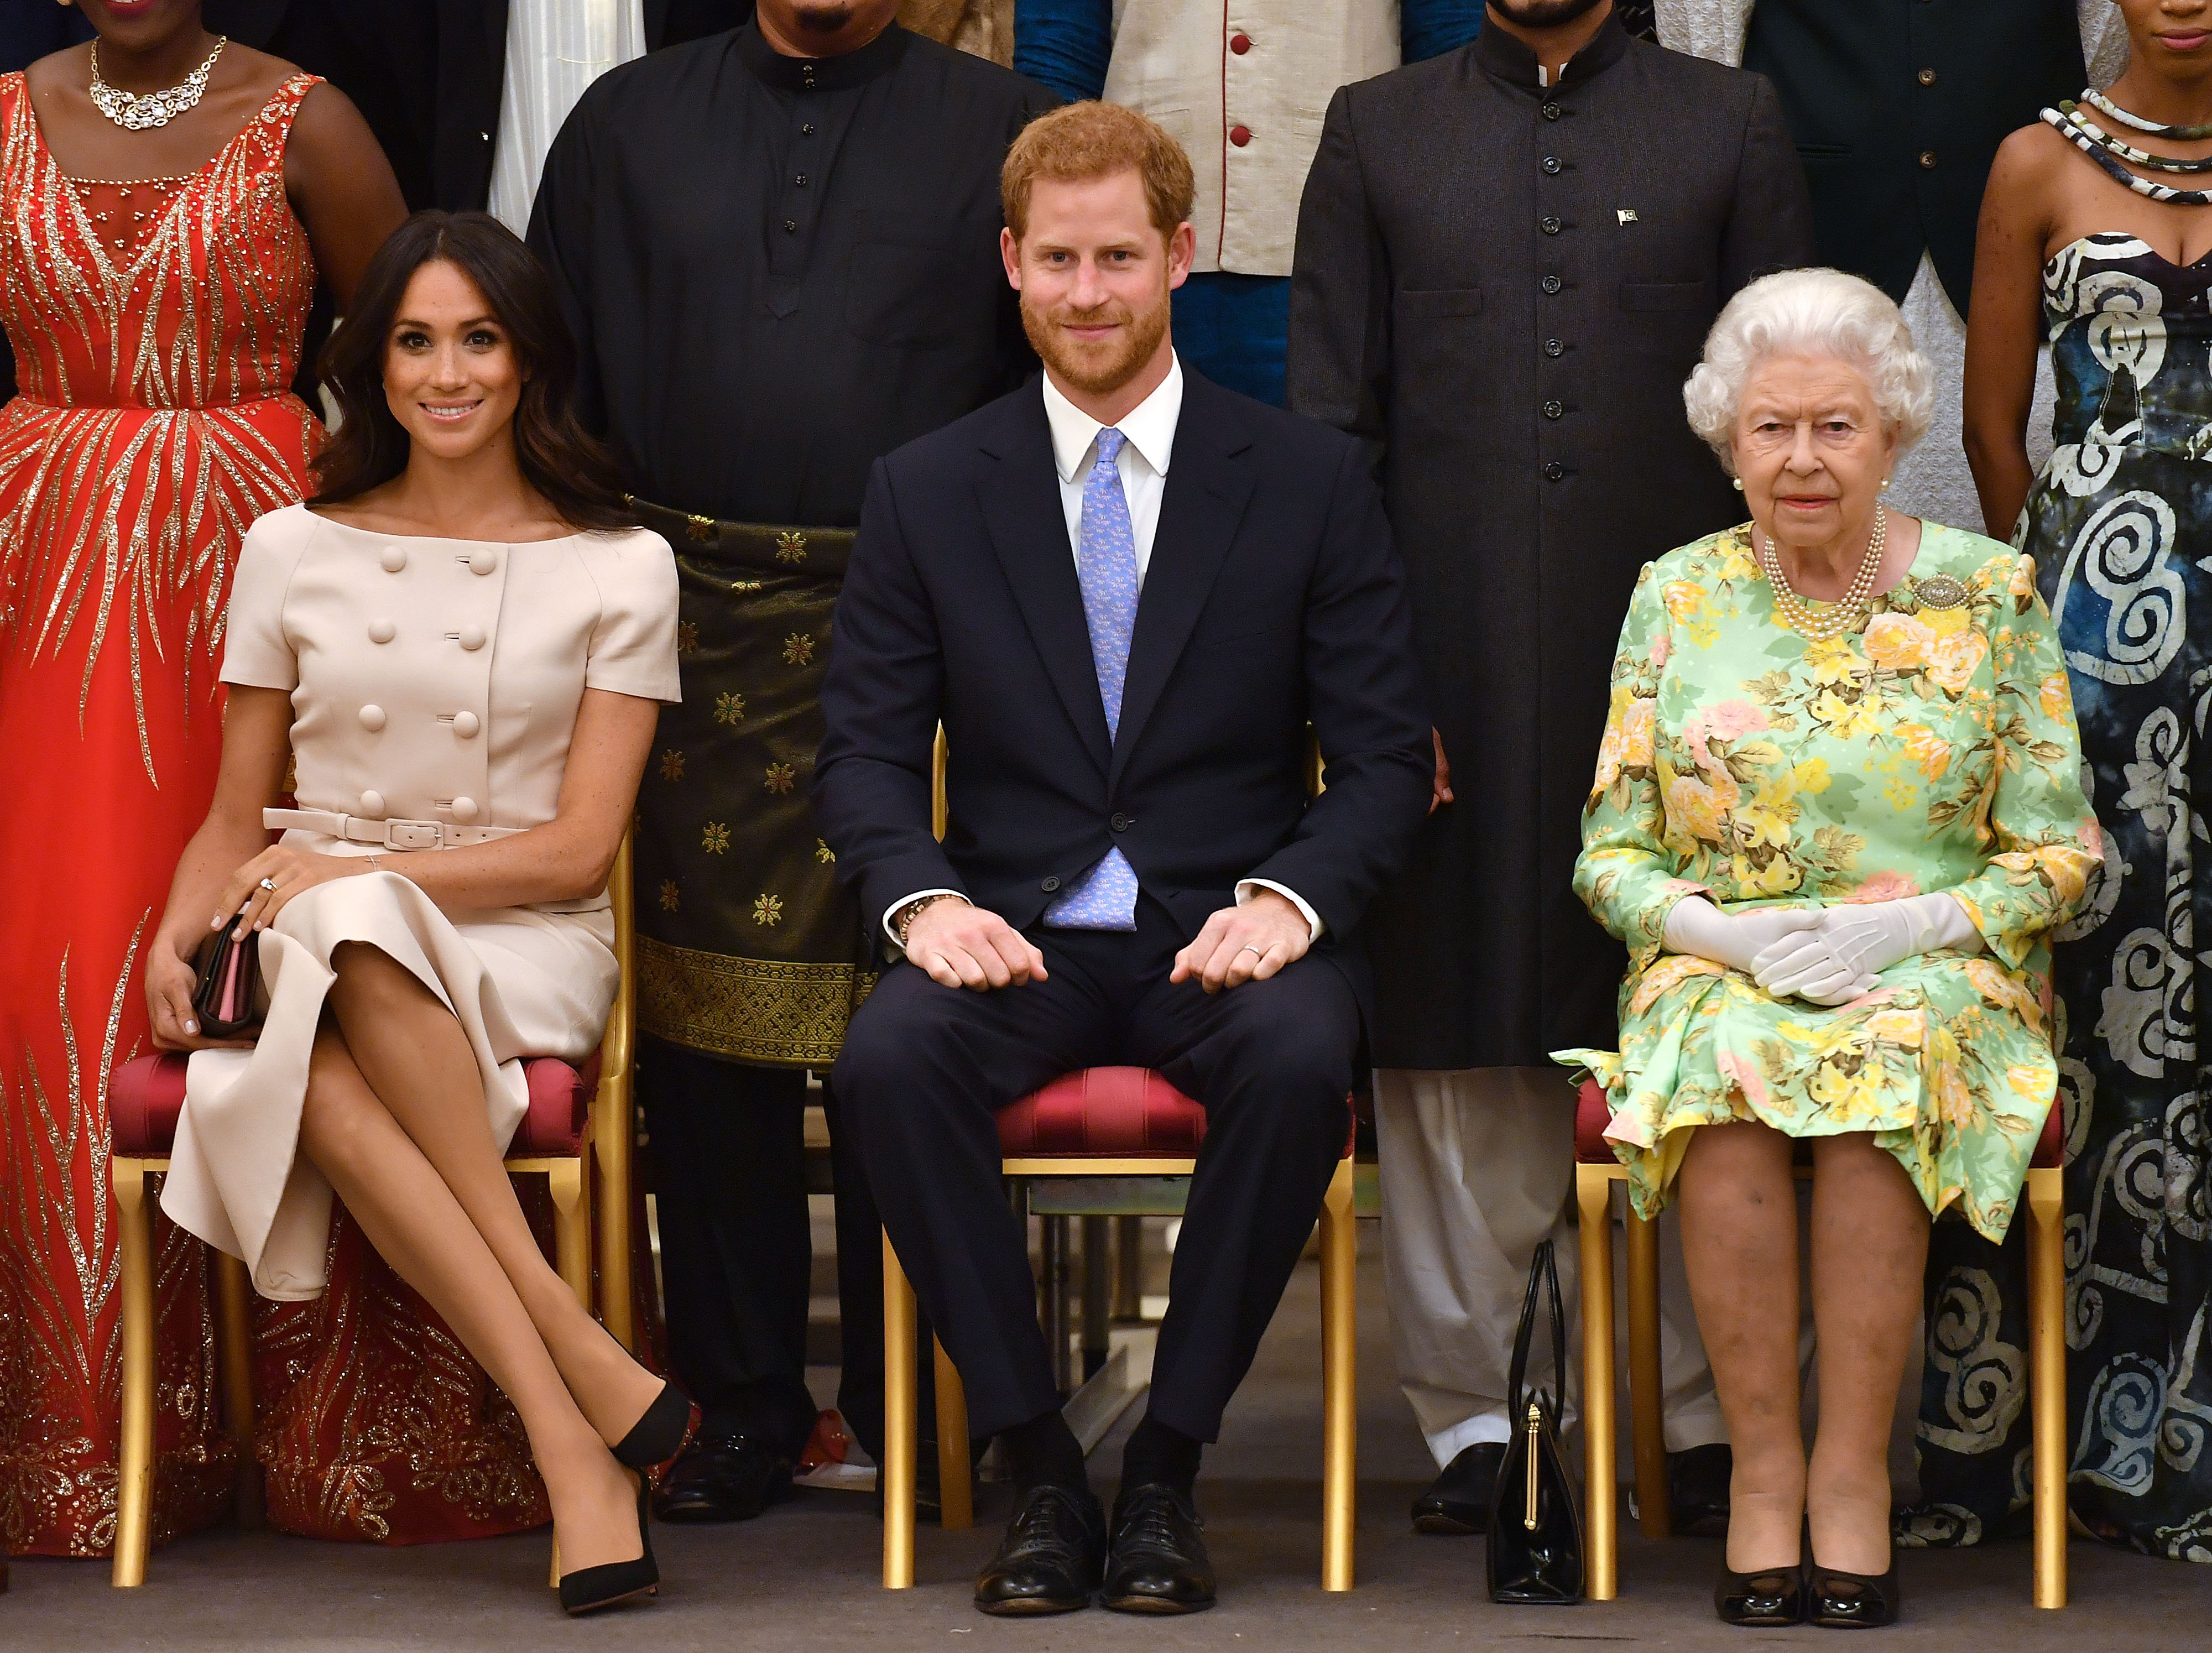 Duchess Meghan, Prince Harry, and Queen Elizabeth II at the Queen's Young Leaders Award Ceremony at Buckingham Palace on June 26, 2018, in London, England. | Source: Getty Images